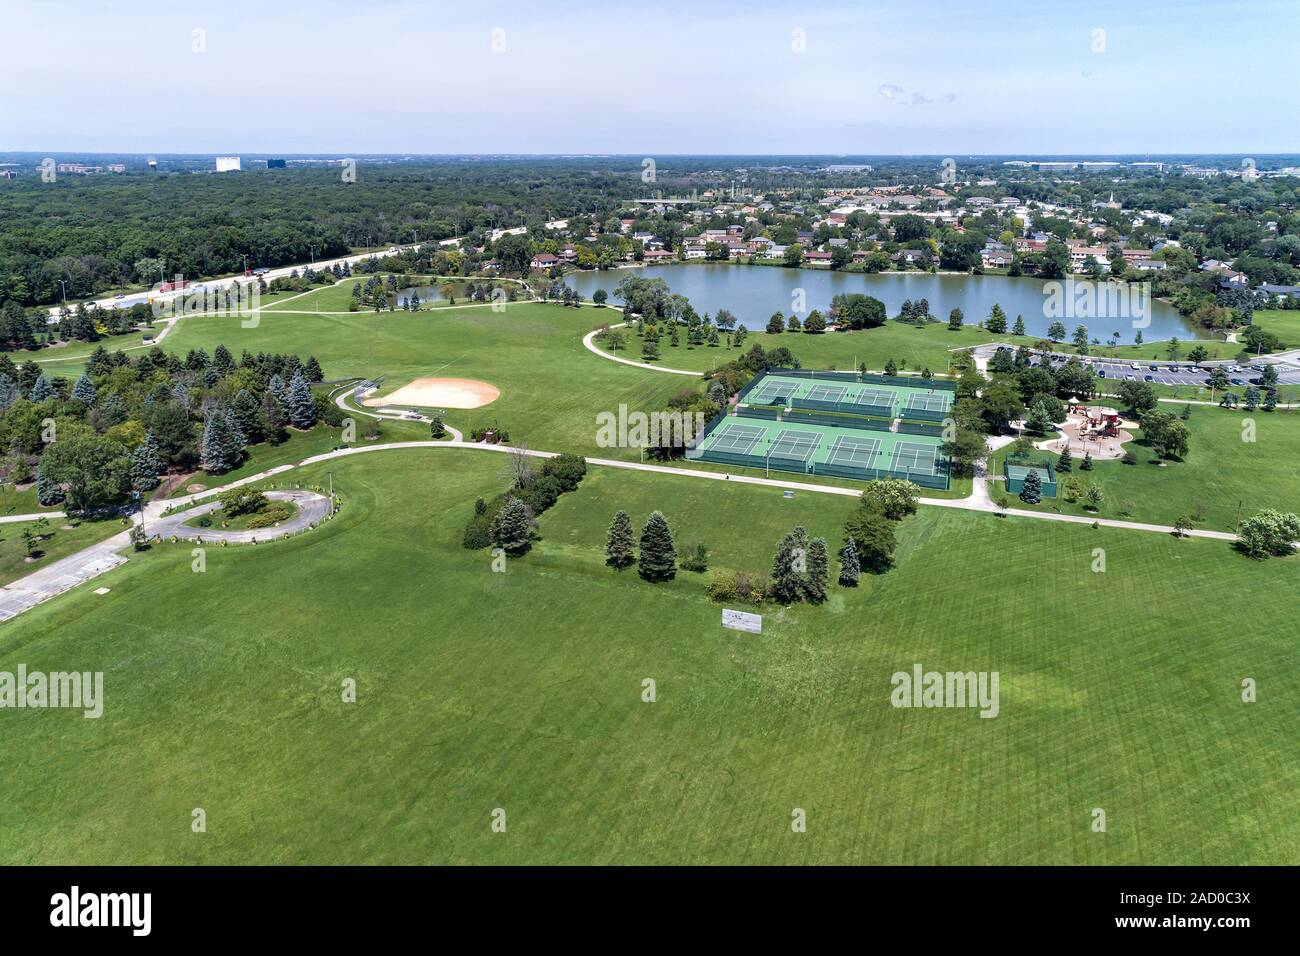 Aerial view of a suburban park district area with a soccer field, tennis courts, lake and playground in Northbrook, IL. USA Stock Photo